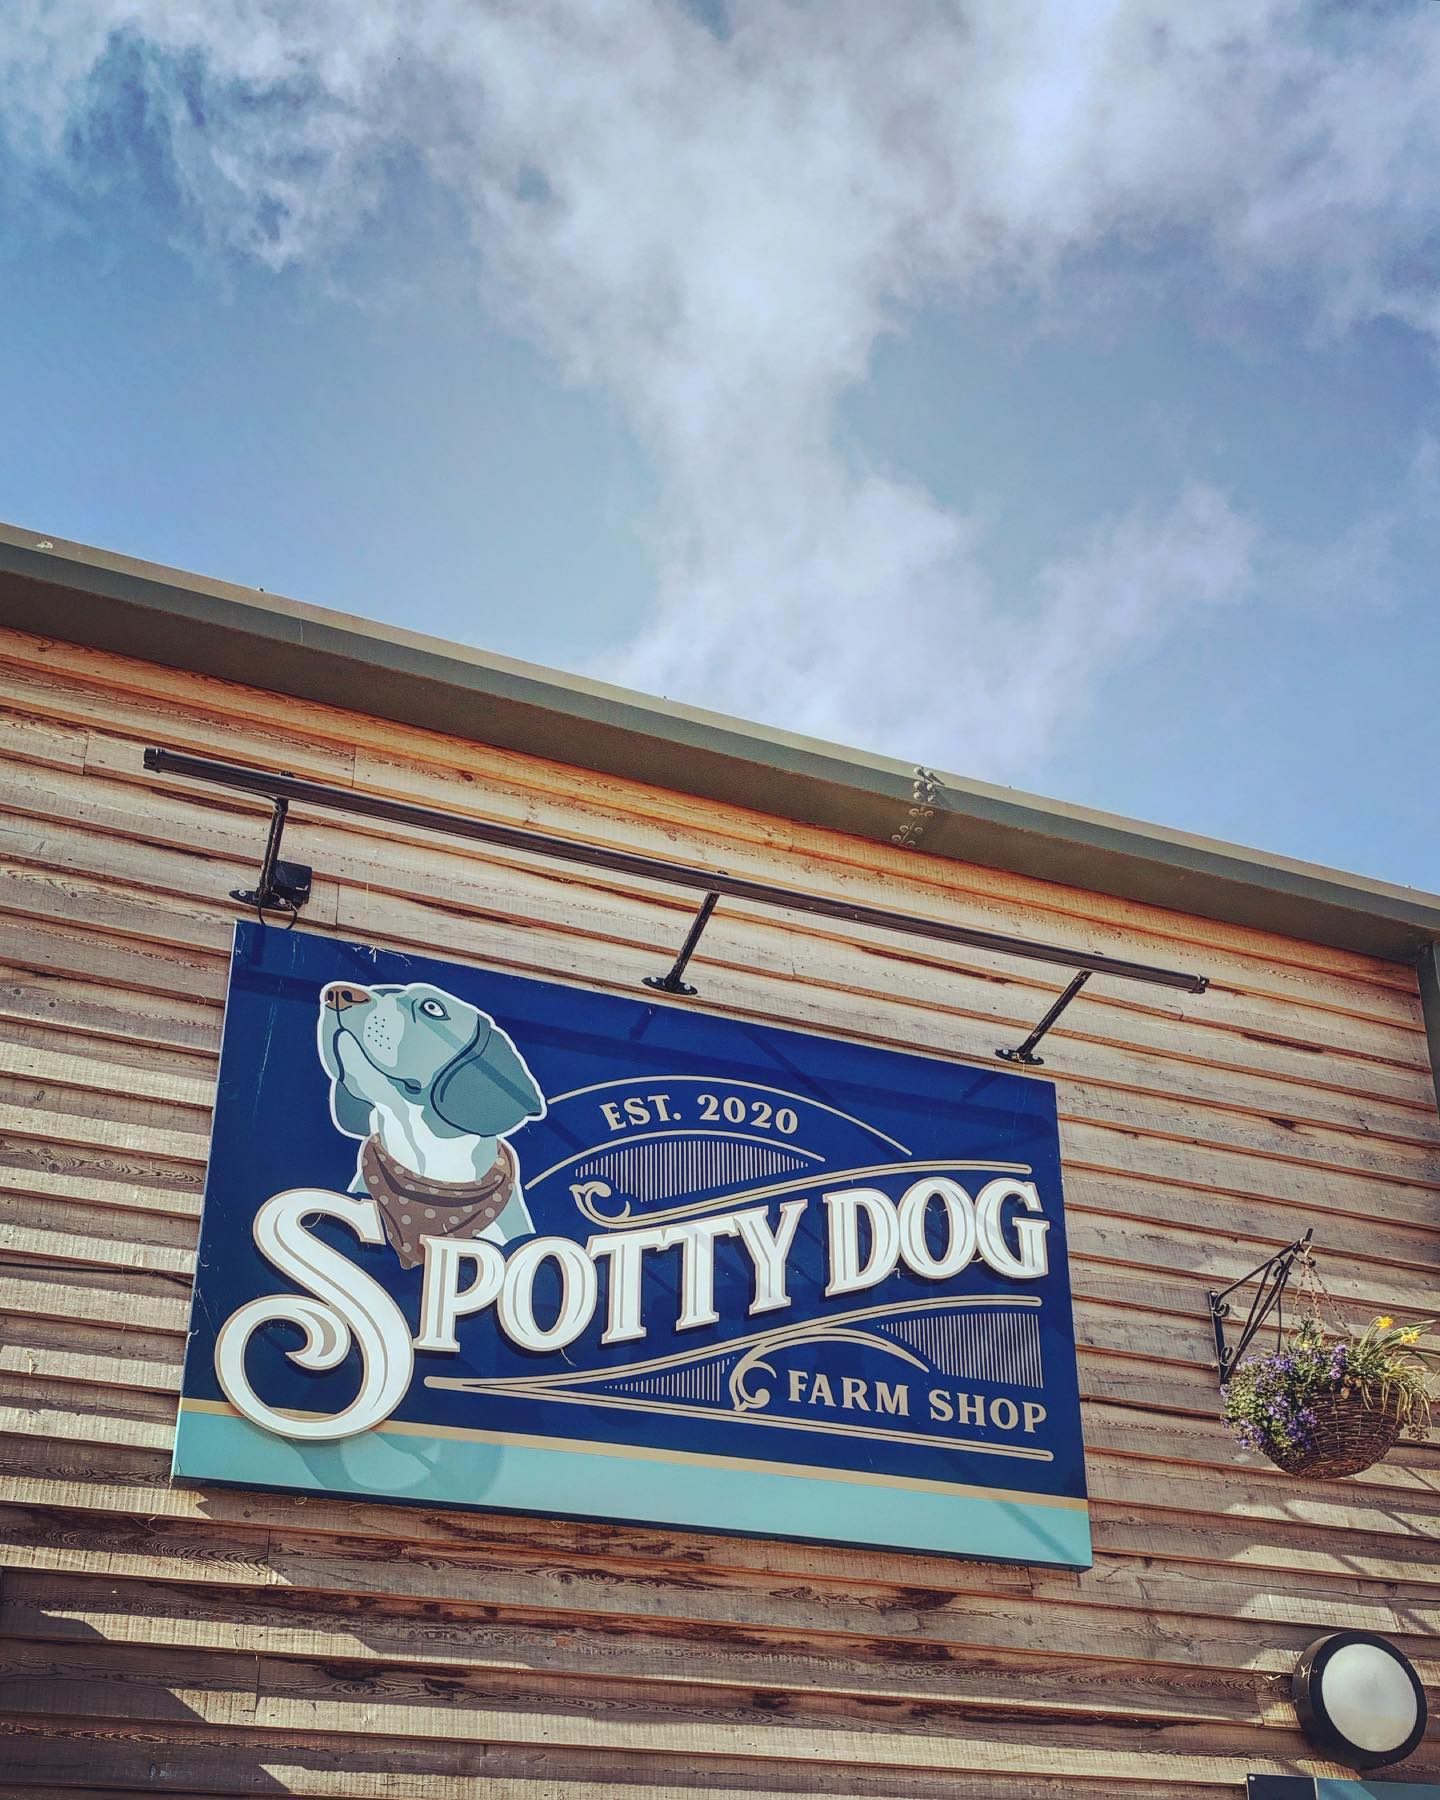 Lovely visit to @spottydogfarmshop today!So nice to see @jessgreyleather @cindy.patterson29 and @flippitystitch who are selling their wares in the fab chalets outside today 🛖